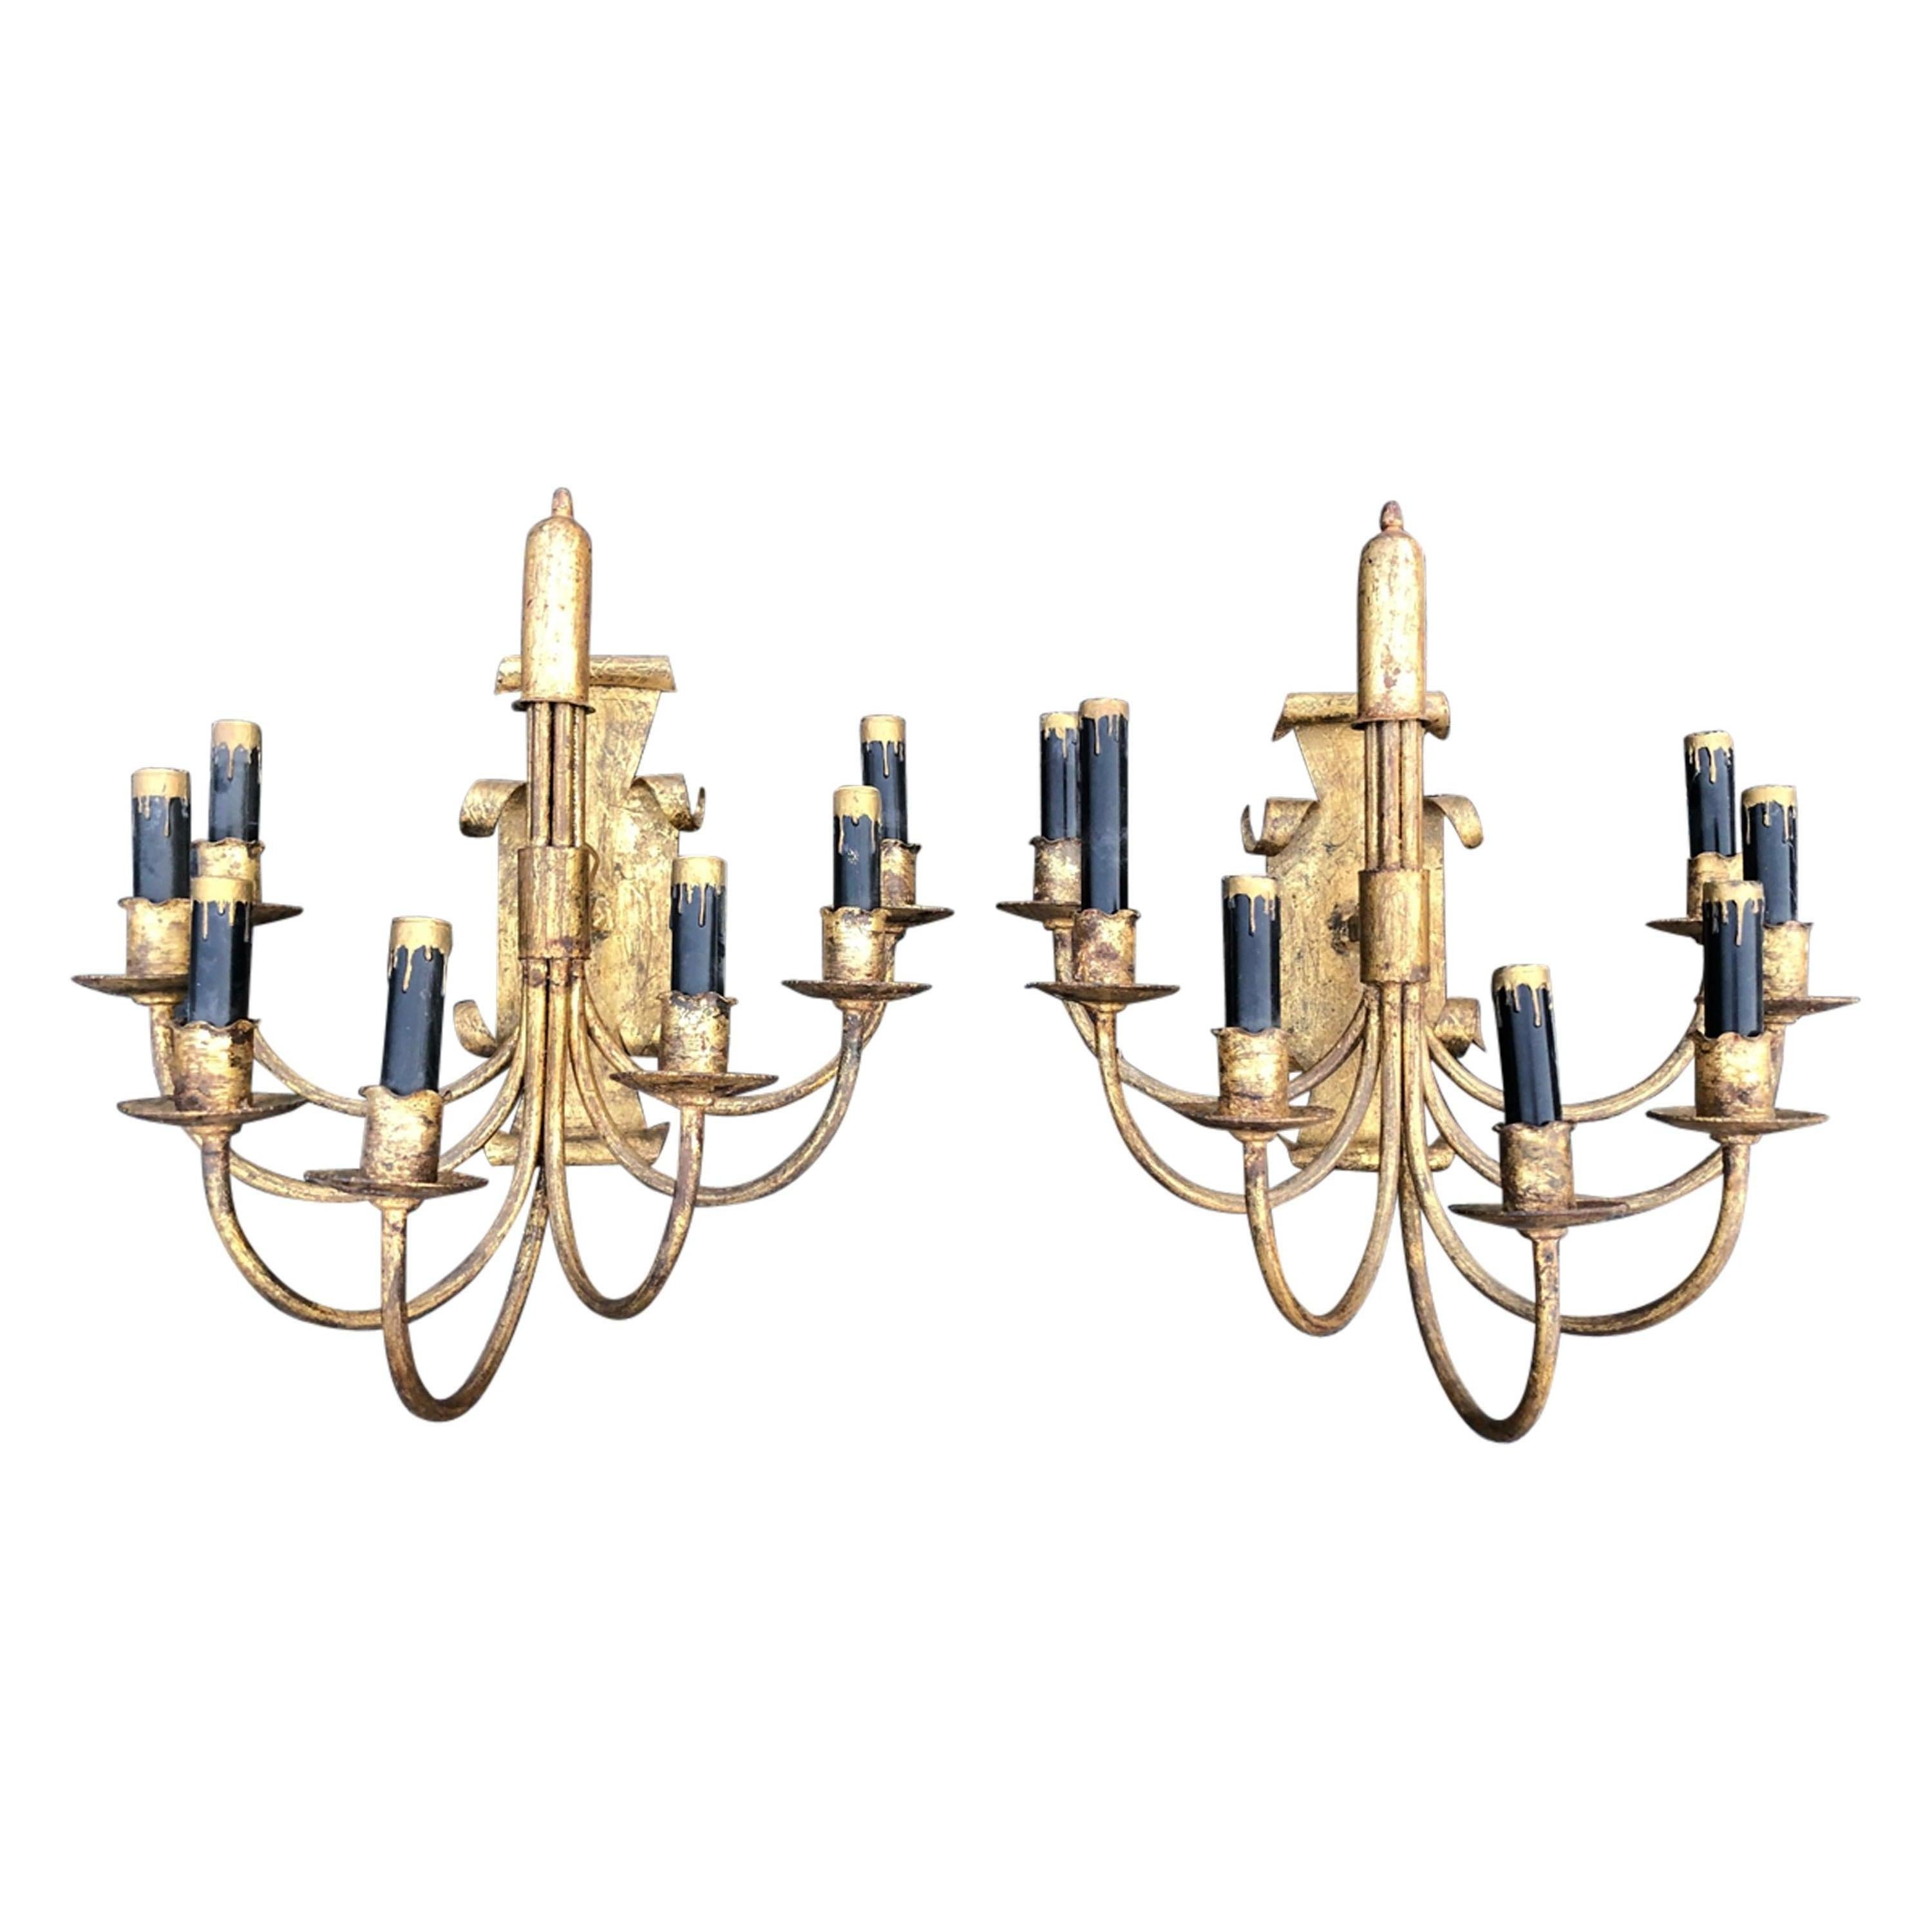 Pair of Gilt Iron Sconces with Black Candle Covers